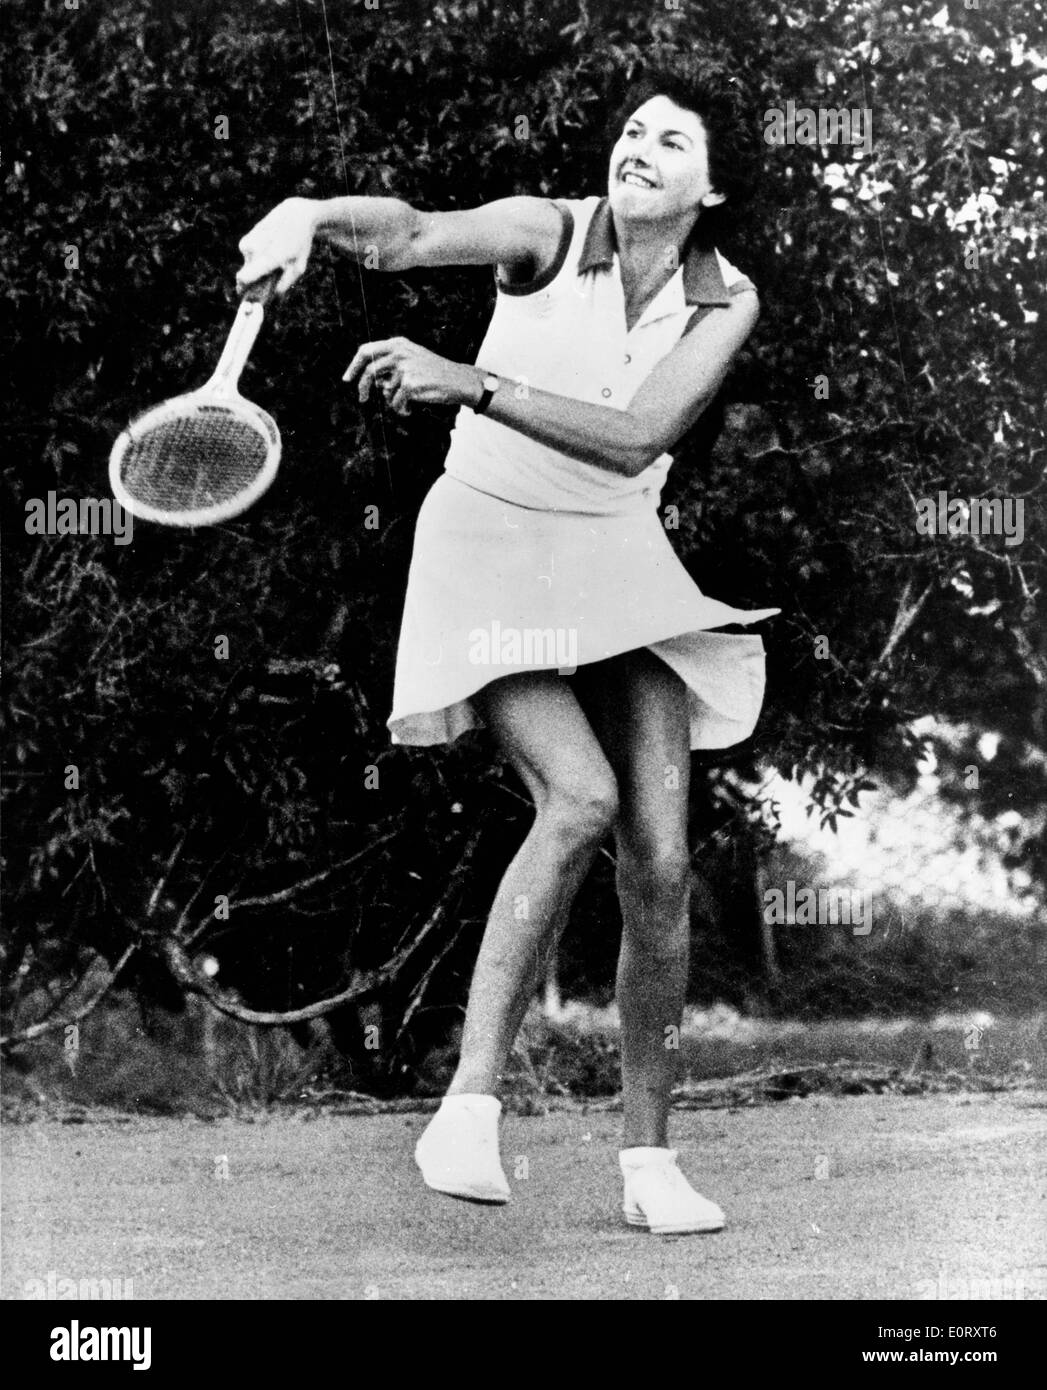 Tamie Fraser plays tennis against husband Stock Photo